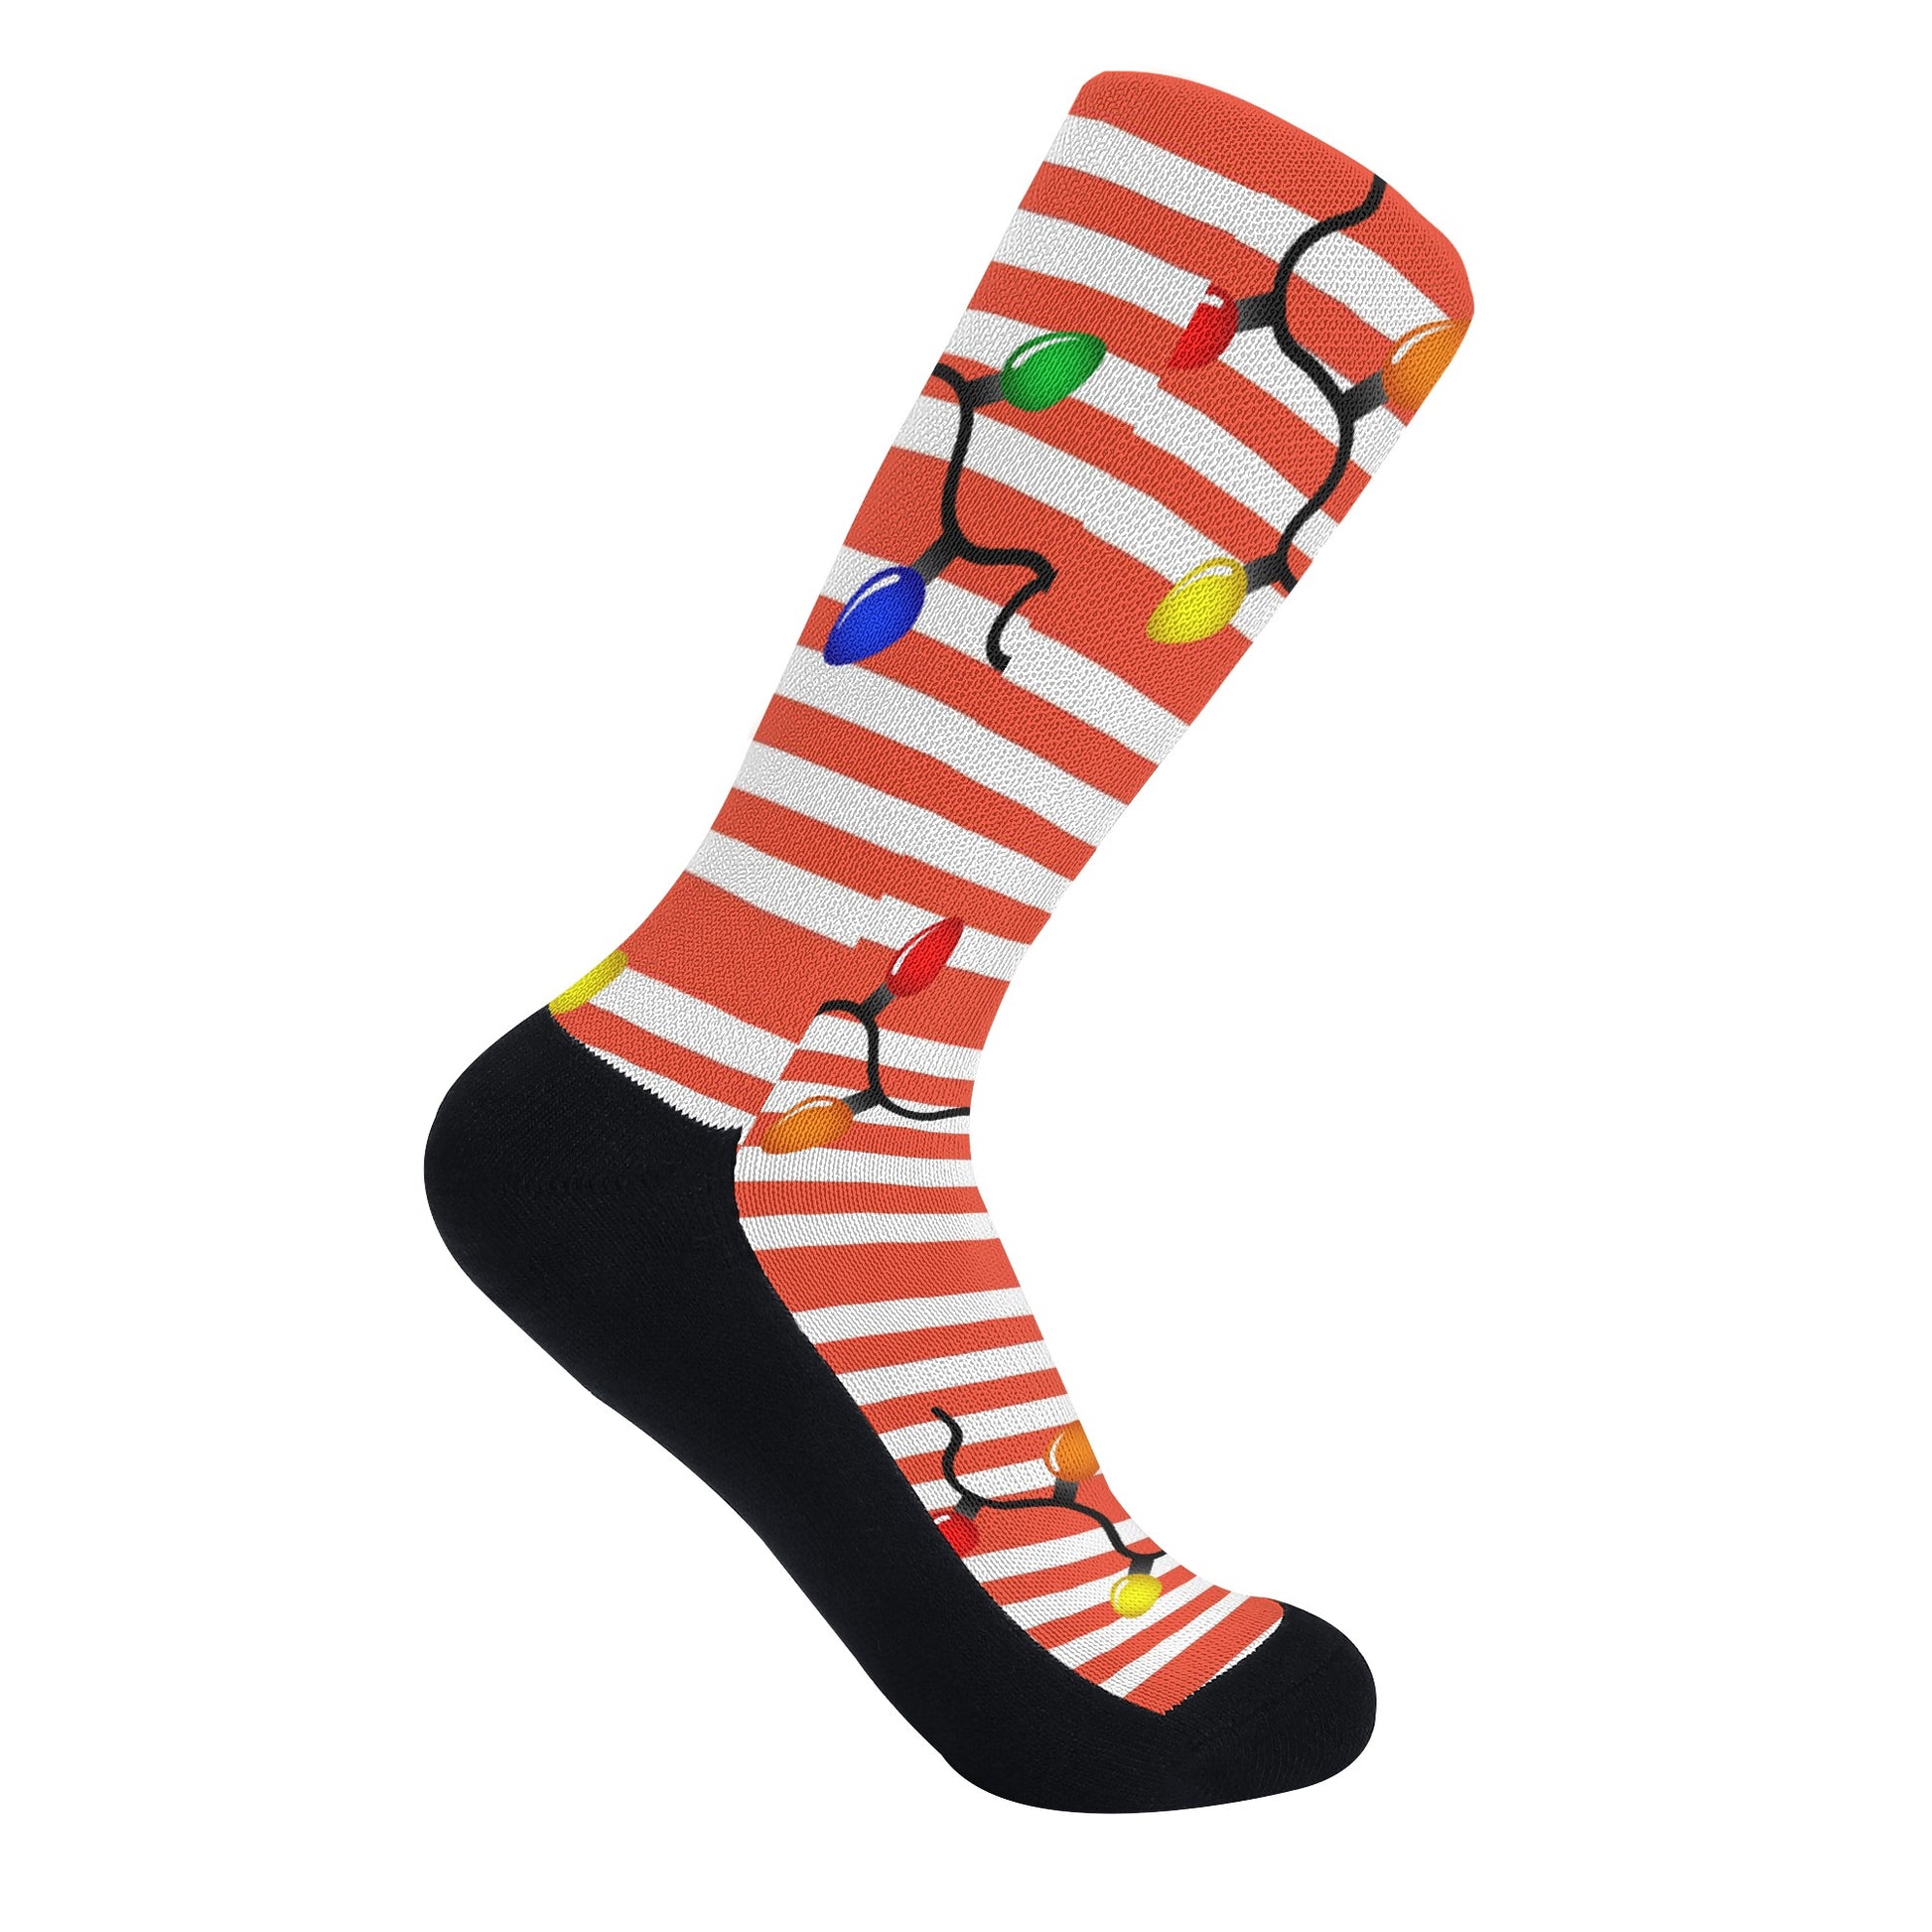 Stand out  with the  Nuggmas Crew Socks  available at Hey Nugget. Grab yours today!